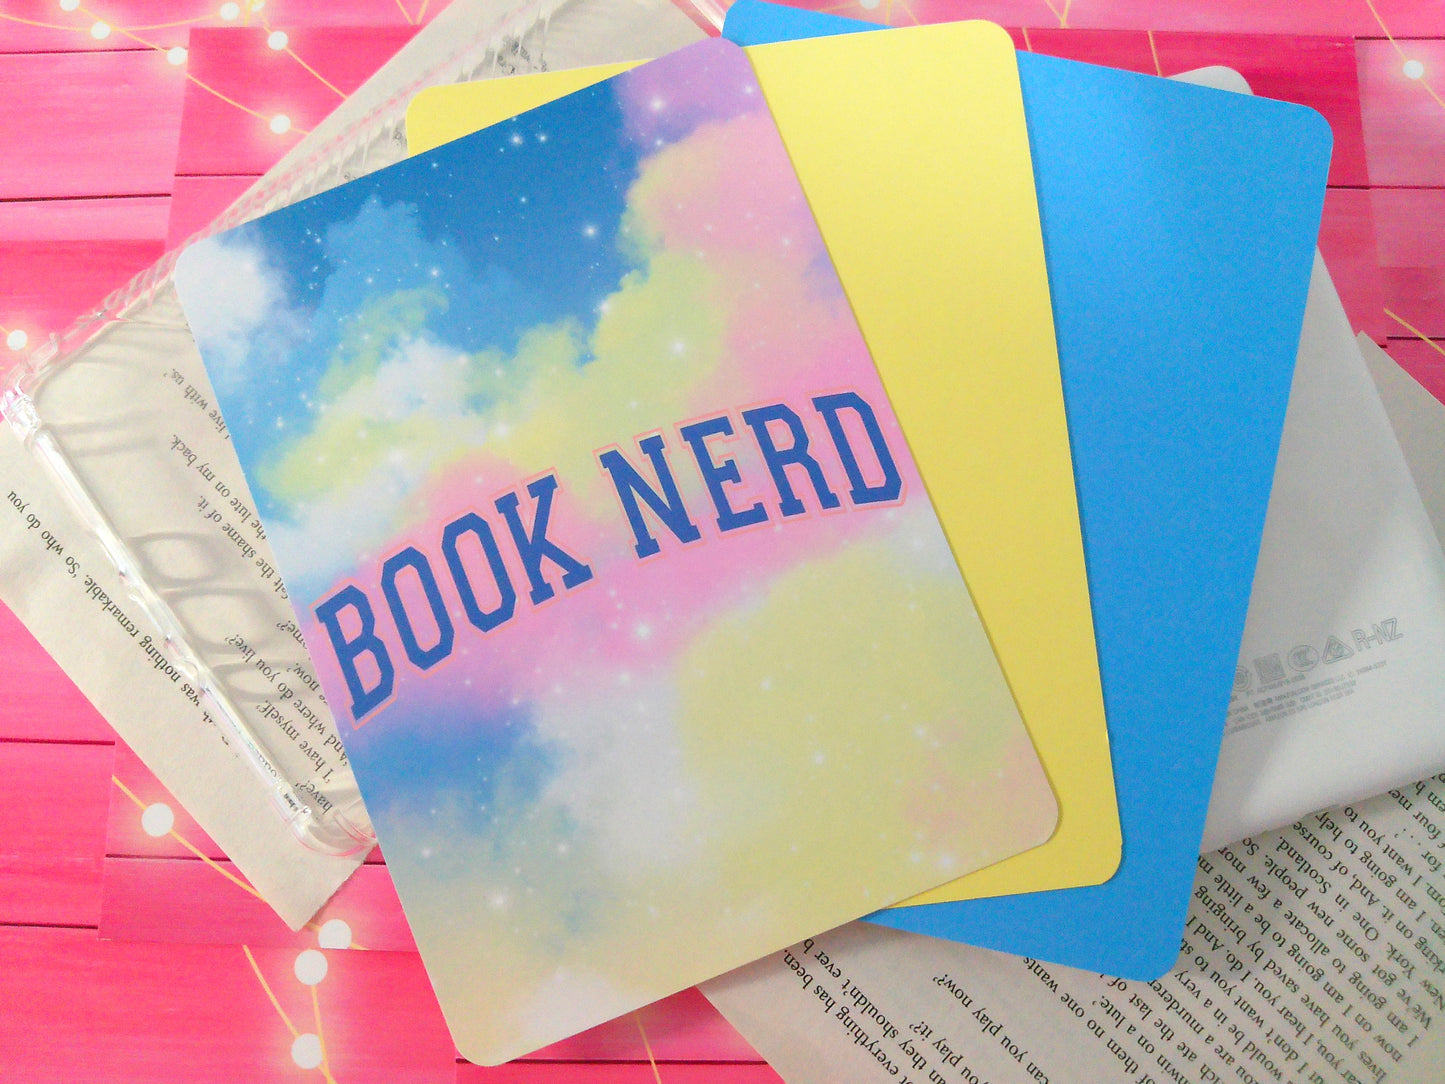 Book Nerd Inserts for Kindle